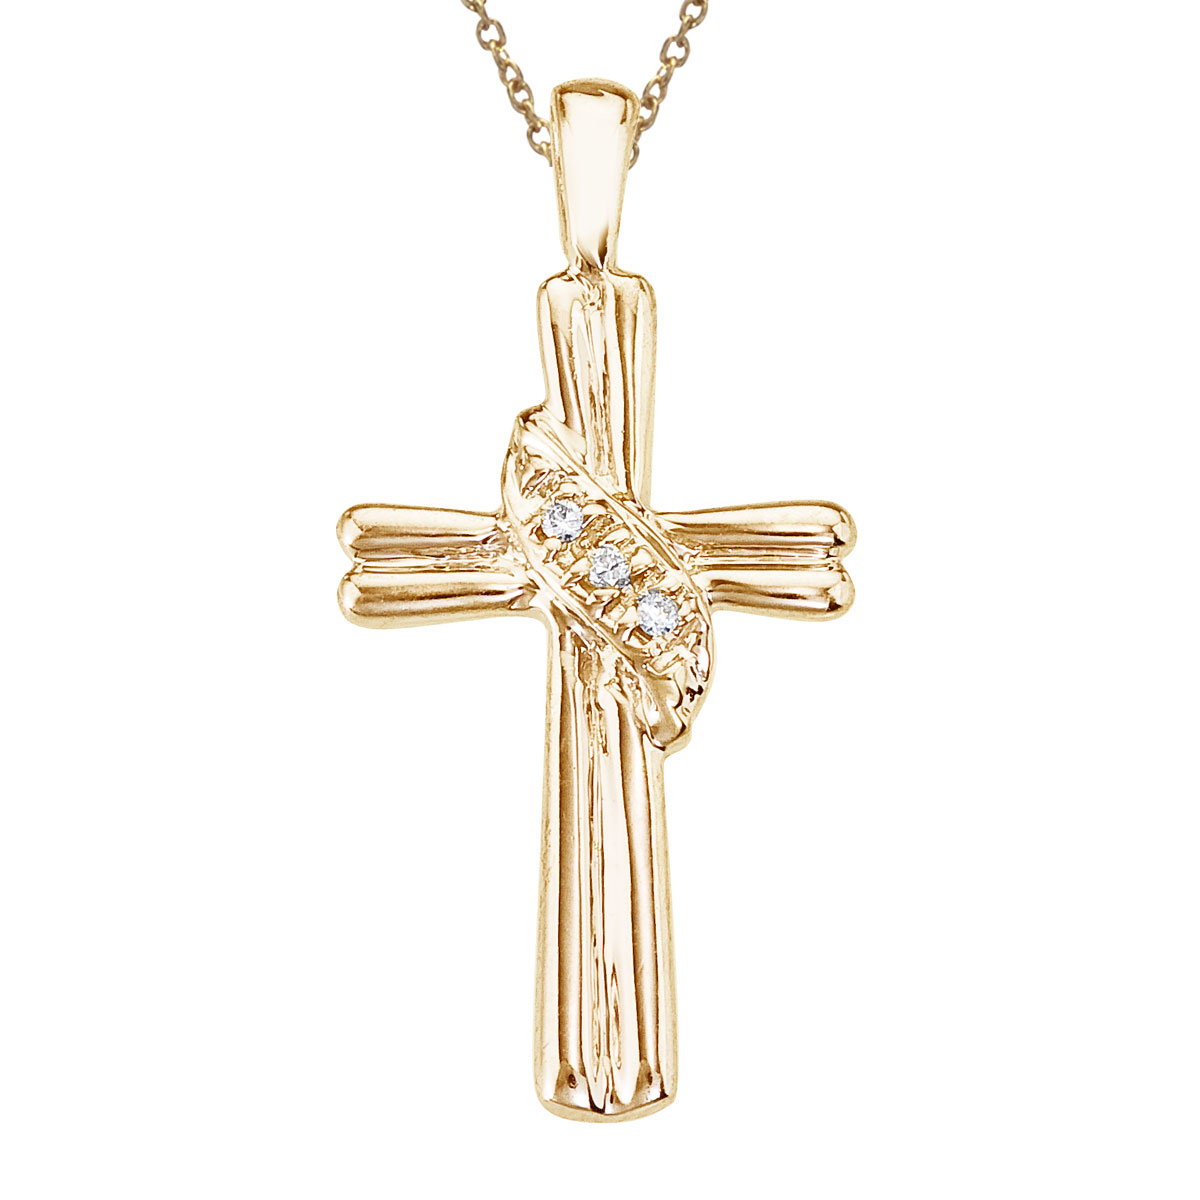 JCX2945: 14k yellow gold cross with shimmering diamond accents. A beautiful and fashionable design.